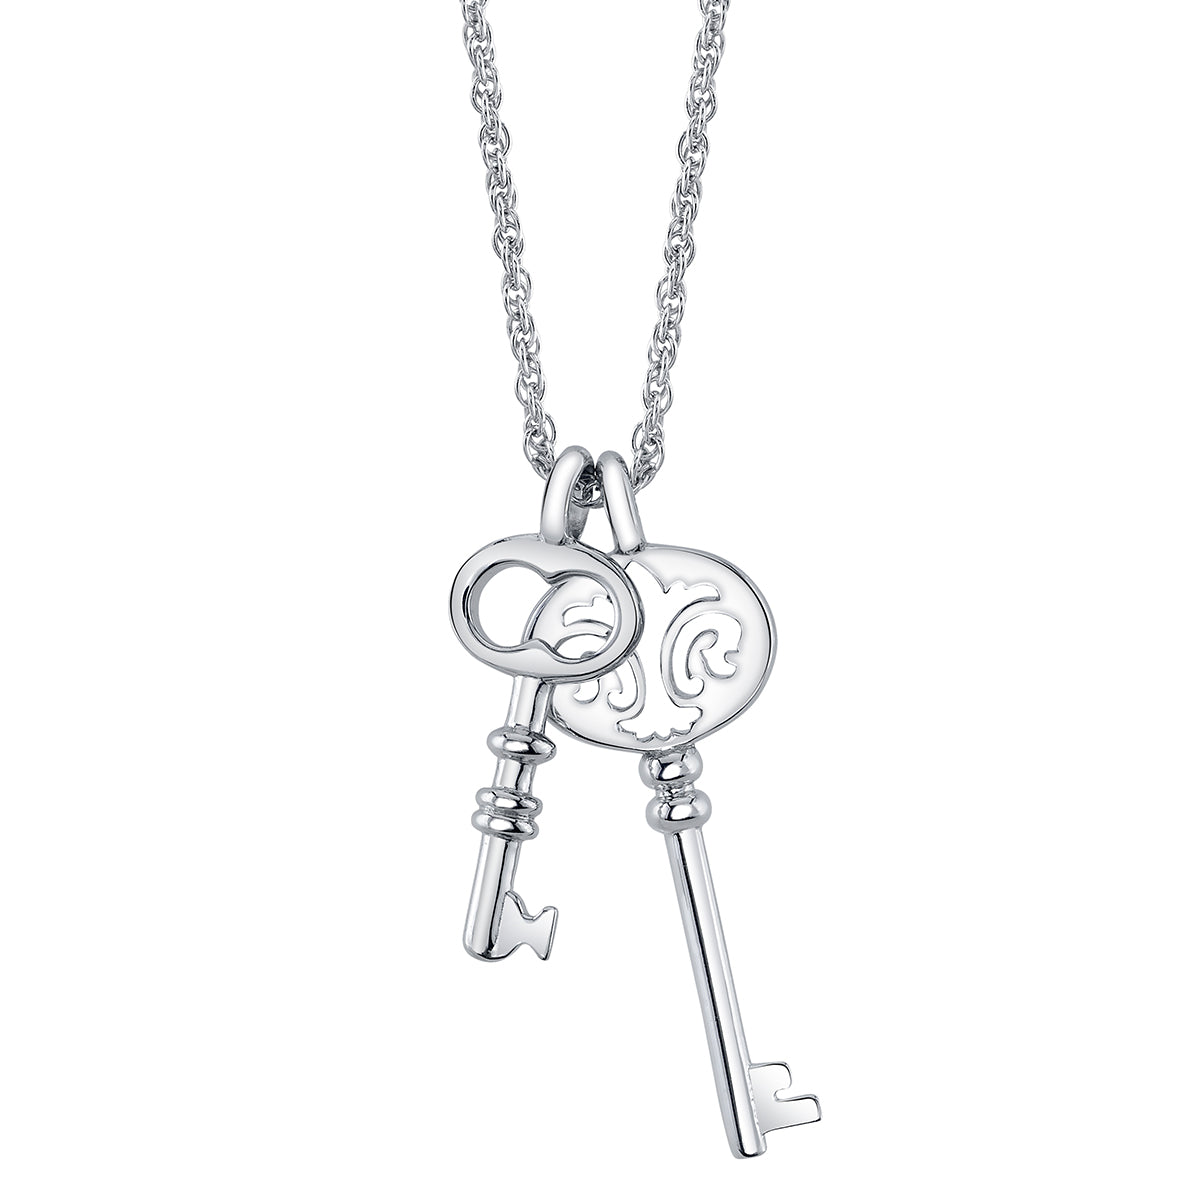 925 Sterling Silver KEY Pendant Chain Necklace A Key For Love Lock